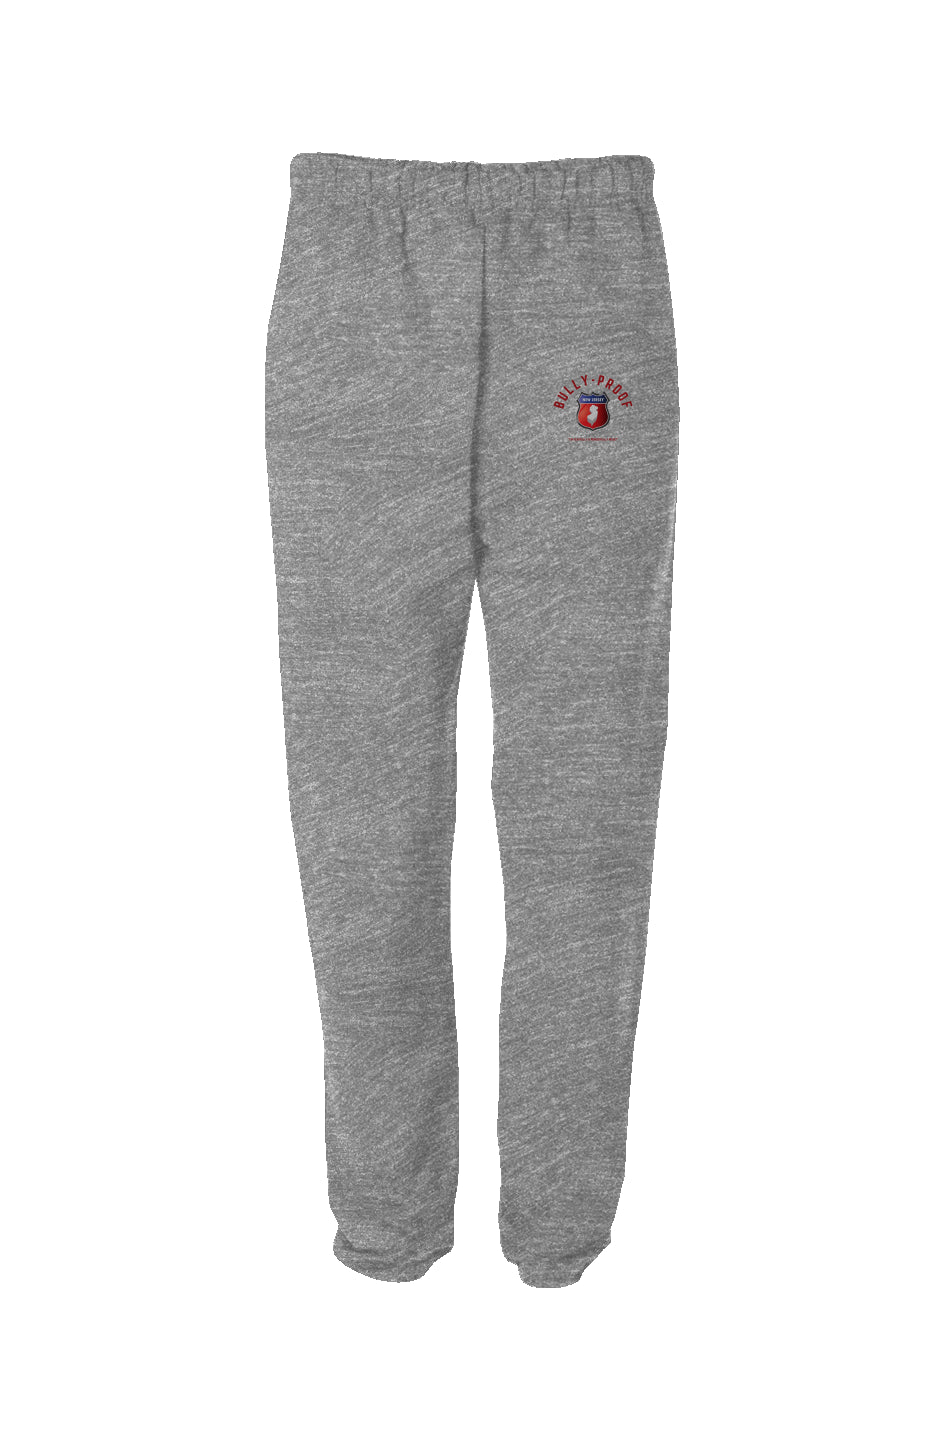 Bully-Proof NJ Collection Jerzees Super Sweatpants With Pockets